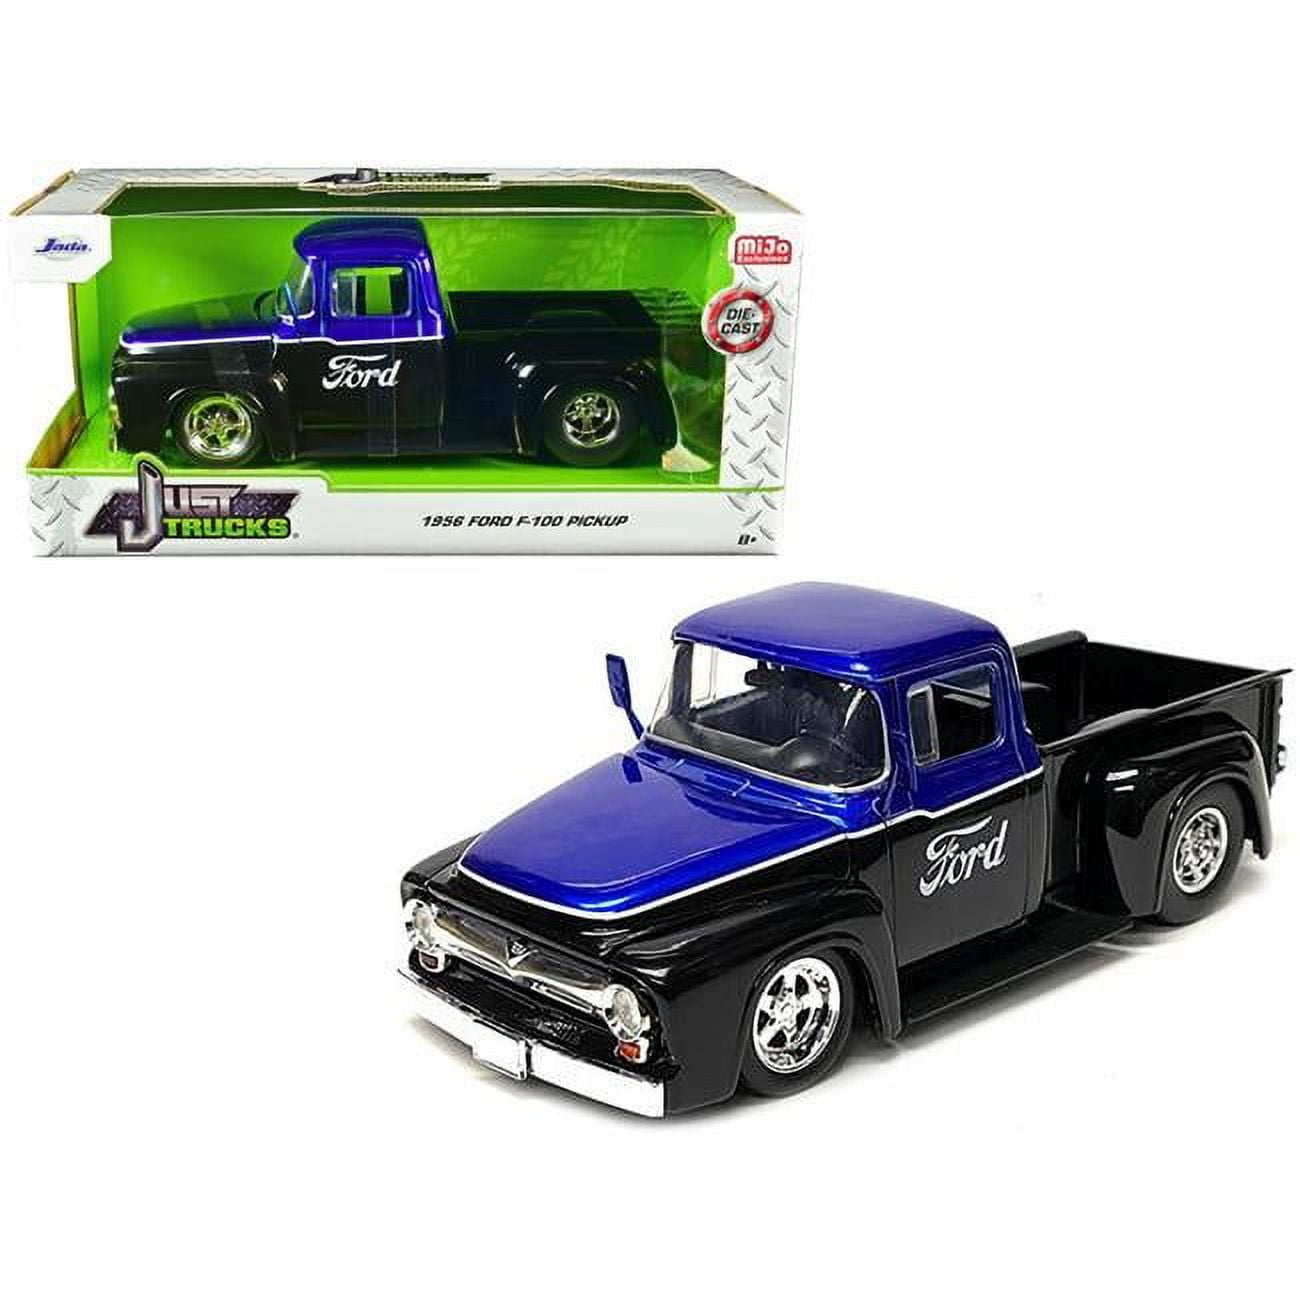 Jada 34307 1956 Ford F-100 Pickup with Ford Graphics Just Trucks Series 1 by 24 Scale Diecast Model Truck, Black & Blue Metallic -  Jada Toys